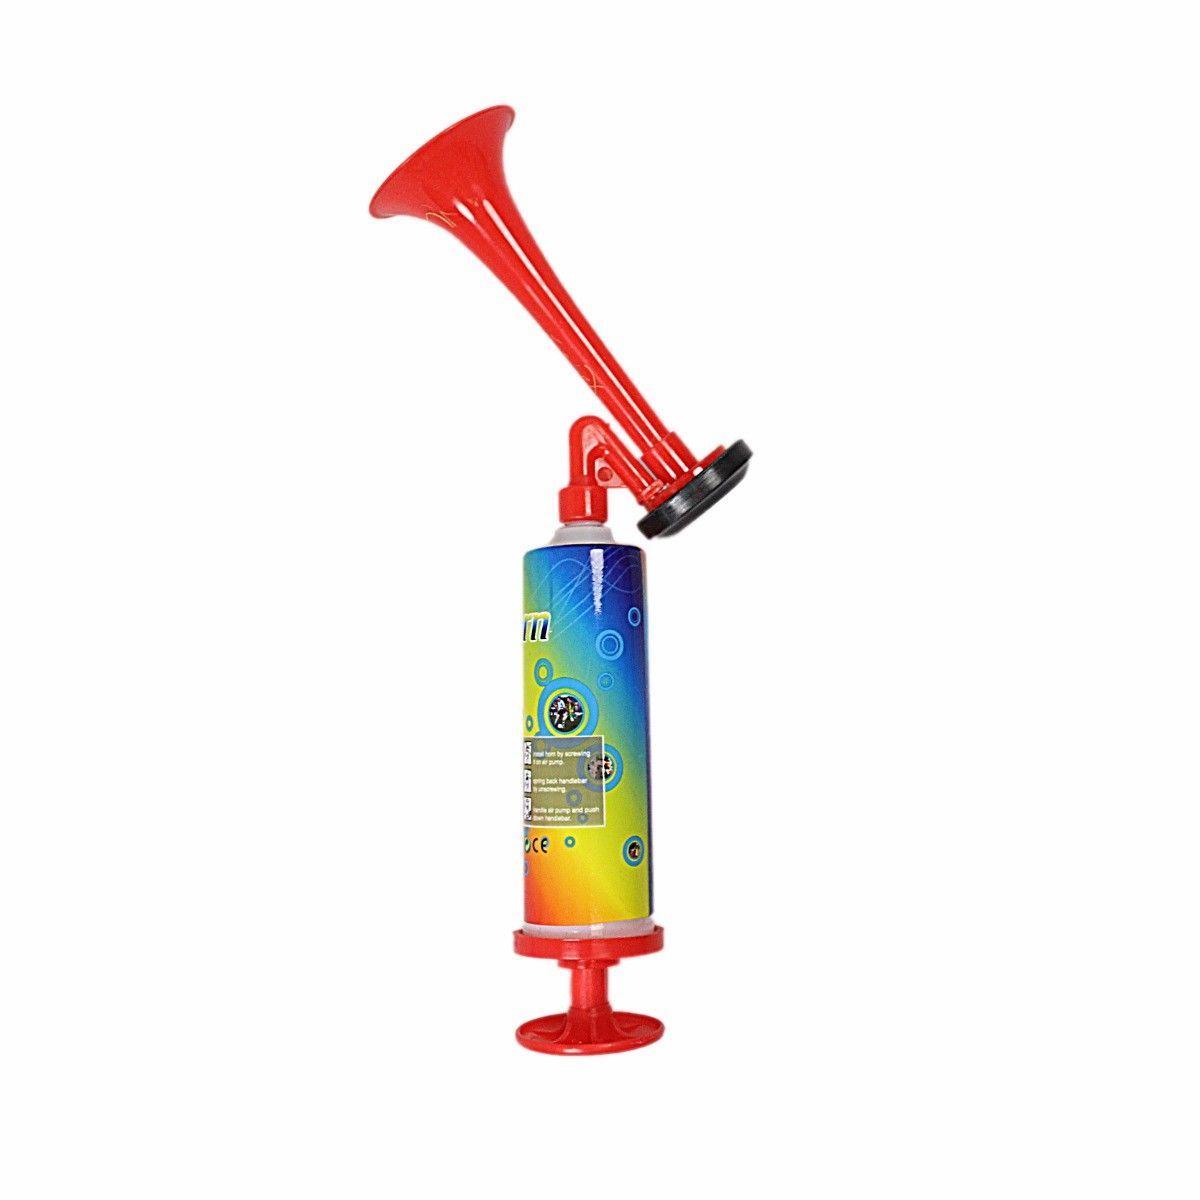 Party Supplies Air Horn Just Attach Horn And Party 0380 A (Parcel Rate)